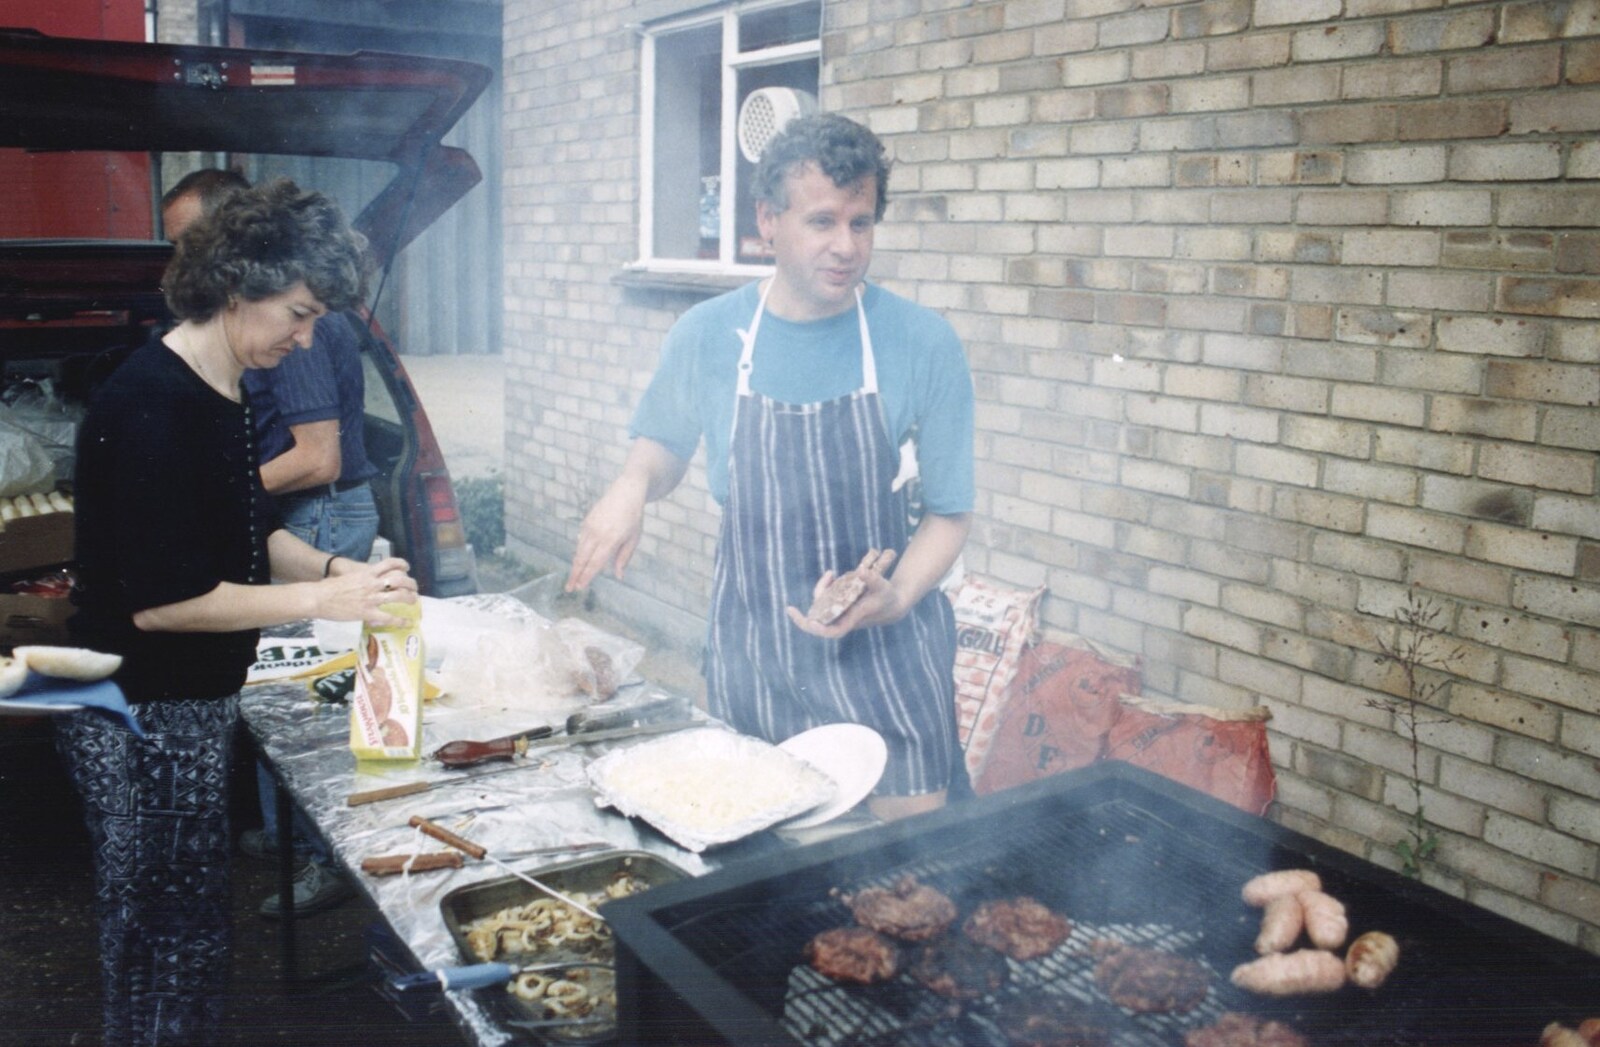 BPCC Anglia Web Open Day, Diss, Norfolk - 23rd June 1990: Bob Caley mans the barbeque